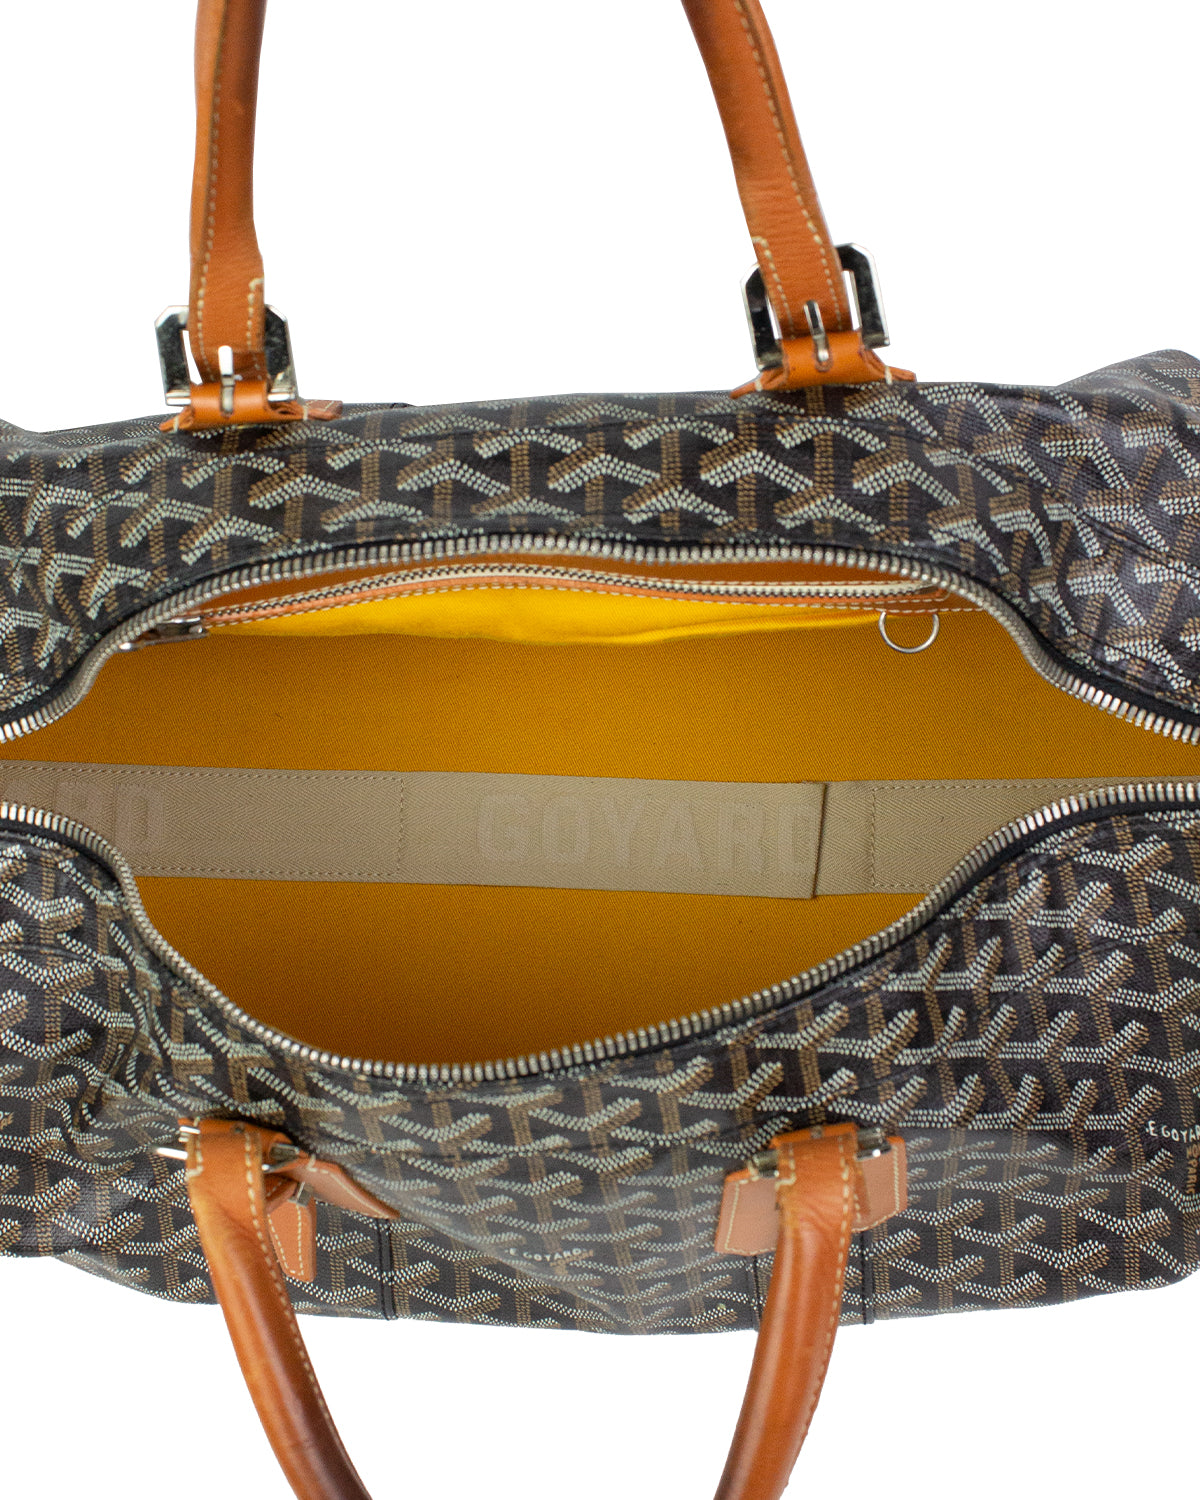 Goyard Croisiere 45 Duffle Travel Bag Yellow Canvas Leather Gym Carry On  Luggage